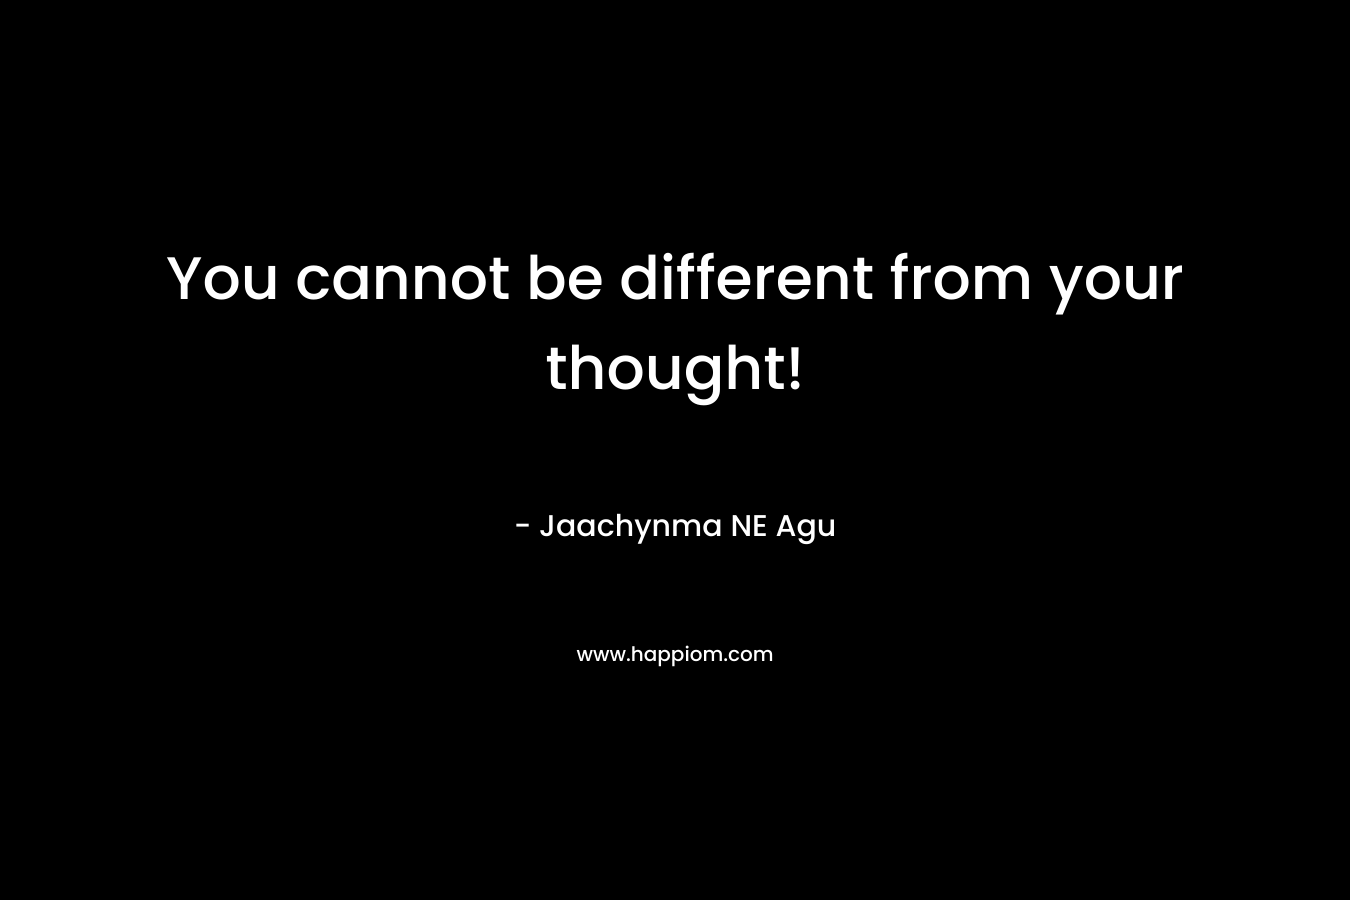 You cannot be different from your thought!